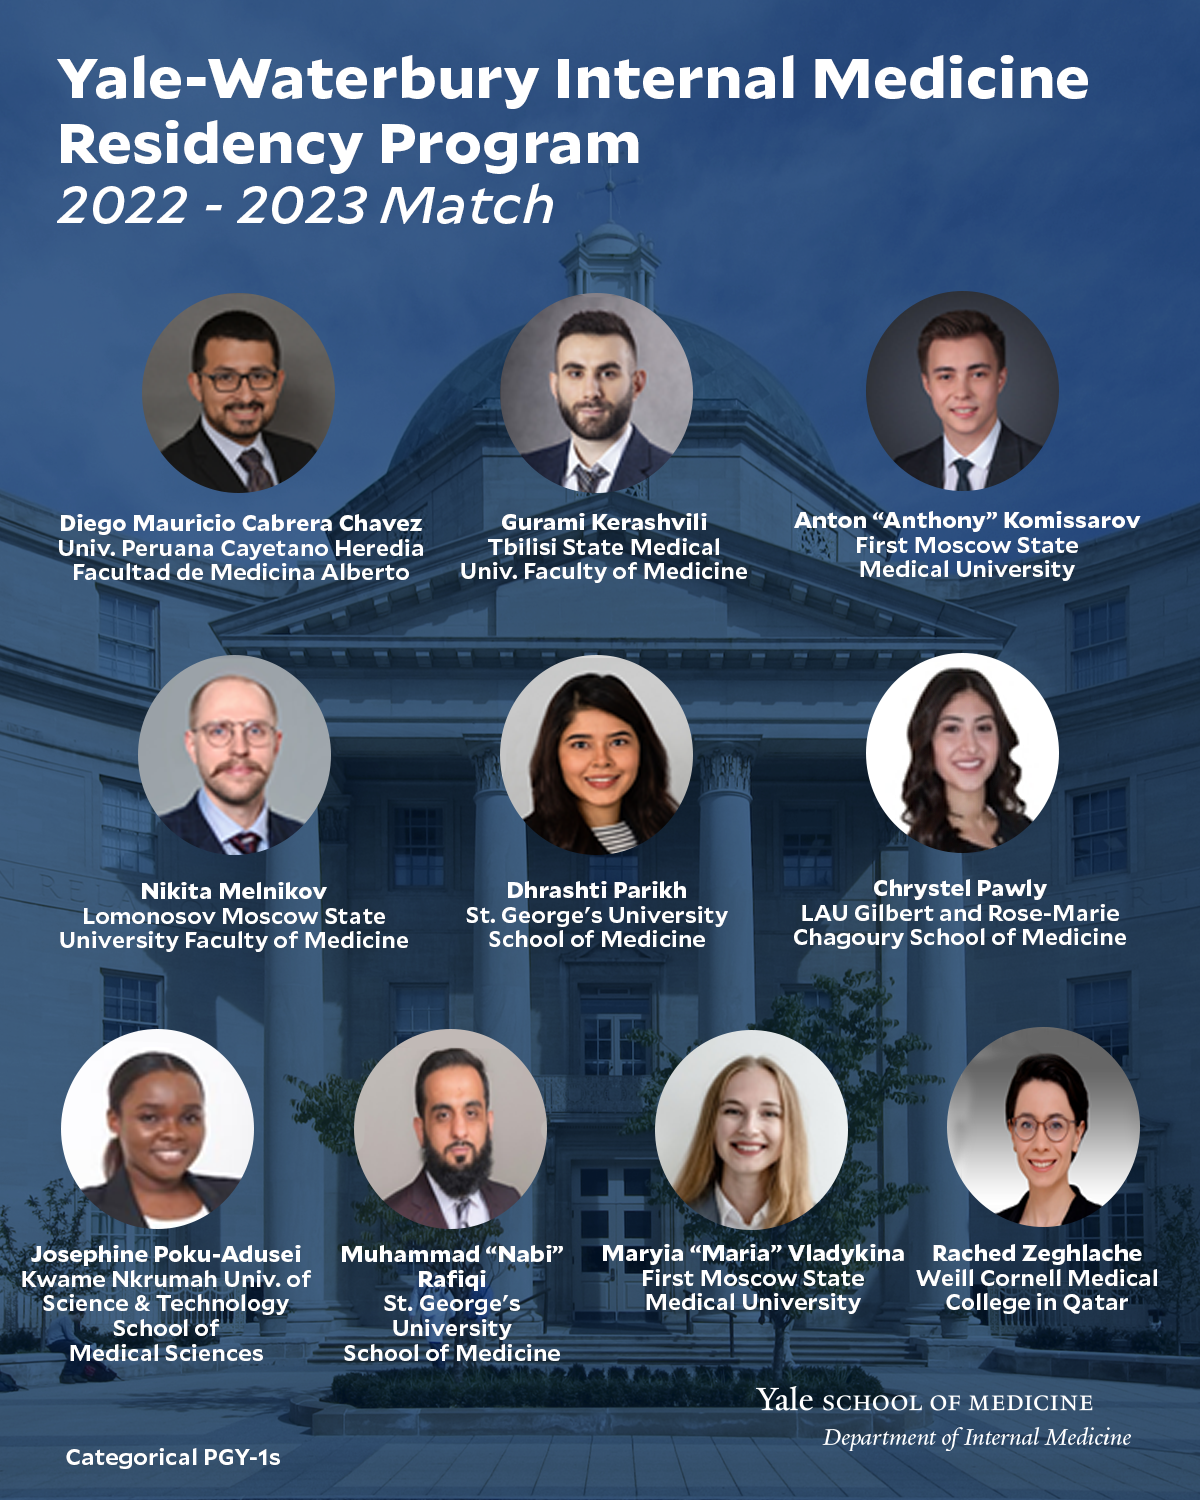 to the 20222023 Match Class for the YaleWaterbury Internal Medicine Residency Program!